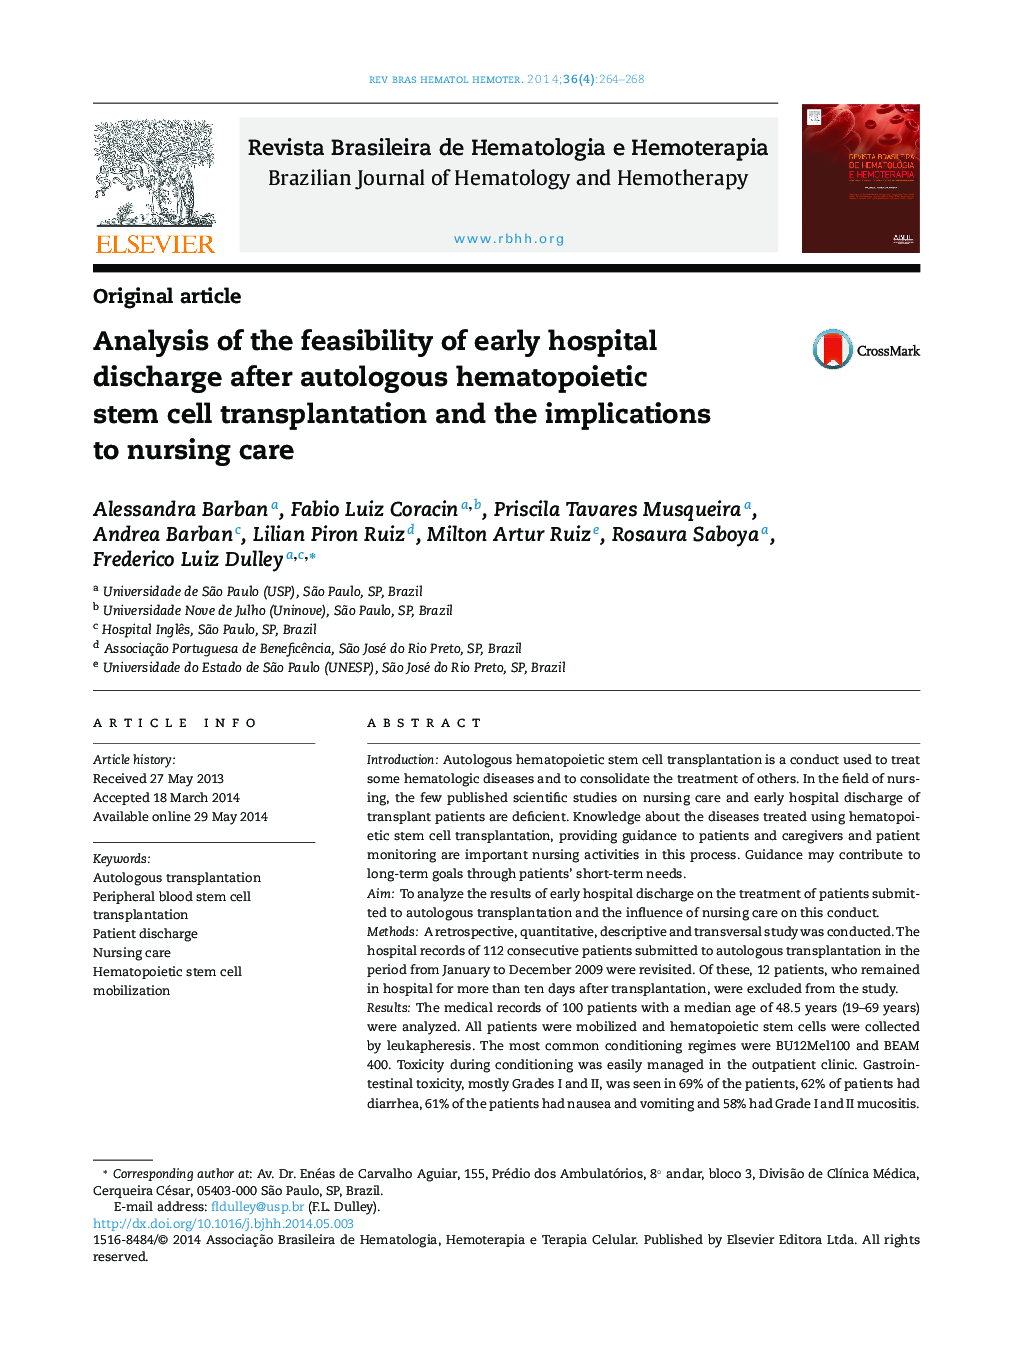 Analysis of the feasibility of early hospital discharge after autologous hematopoietic stem cell transplantation and the implications to nursing care